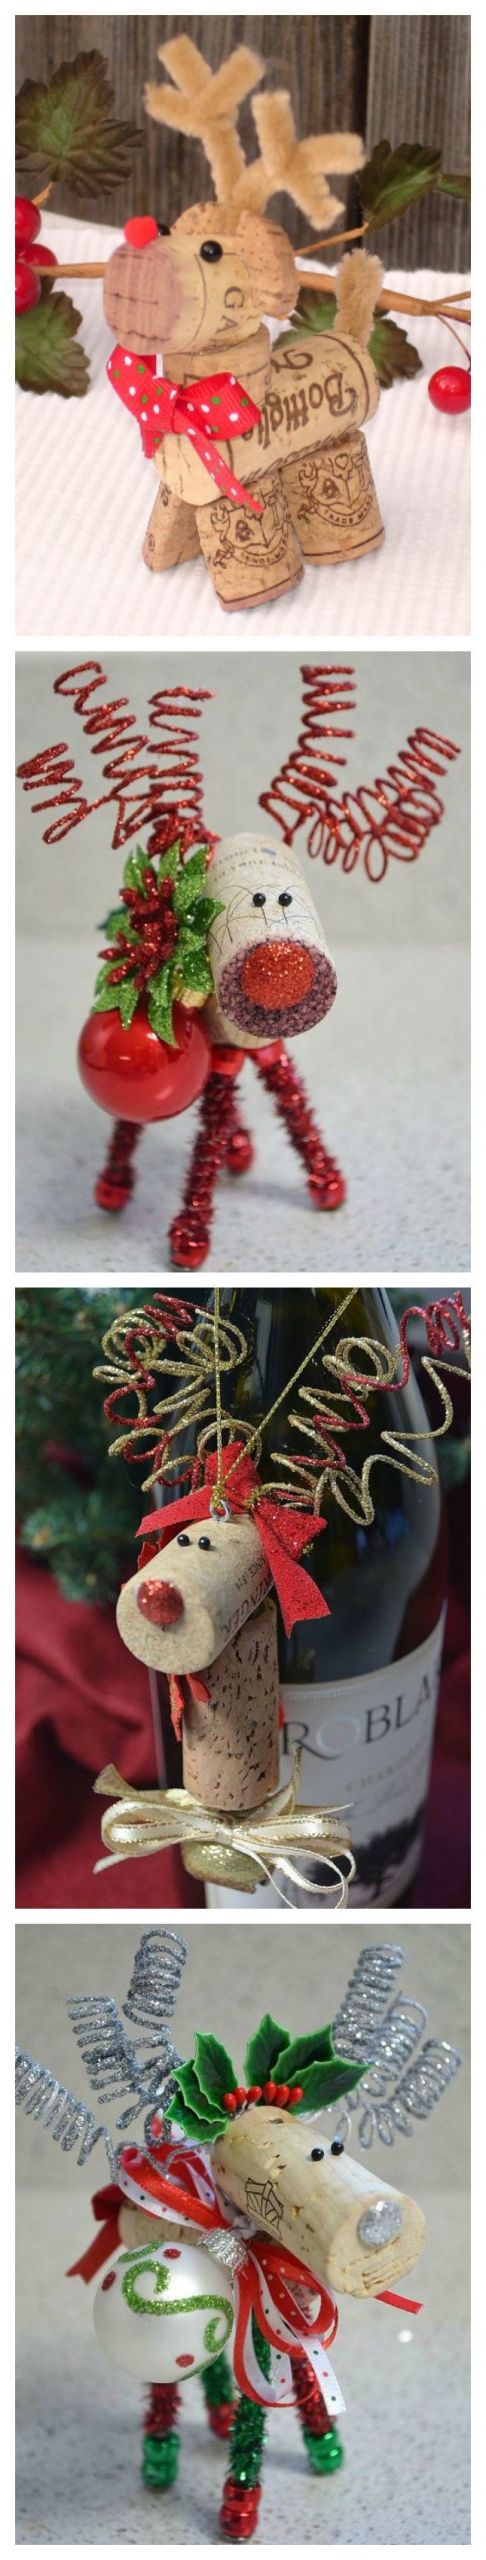 DIY Christmas Crafts Pinterest
 17 Epic Christmas Craft Ideas Pretty My Party